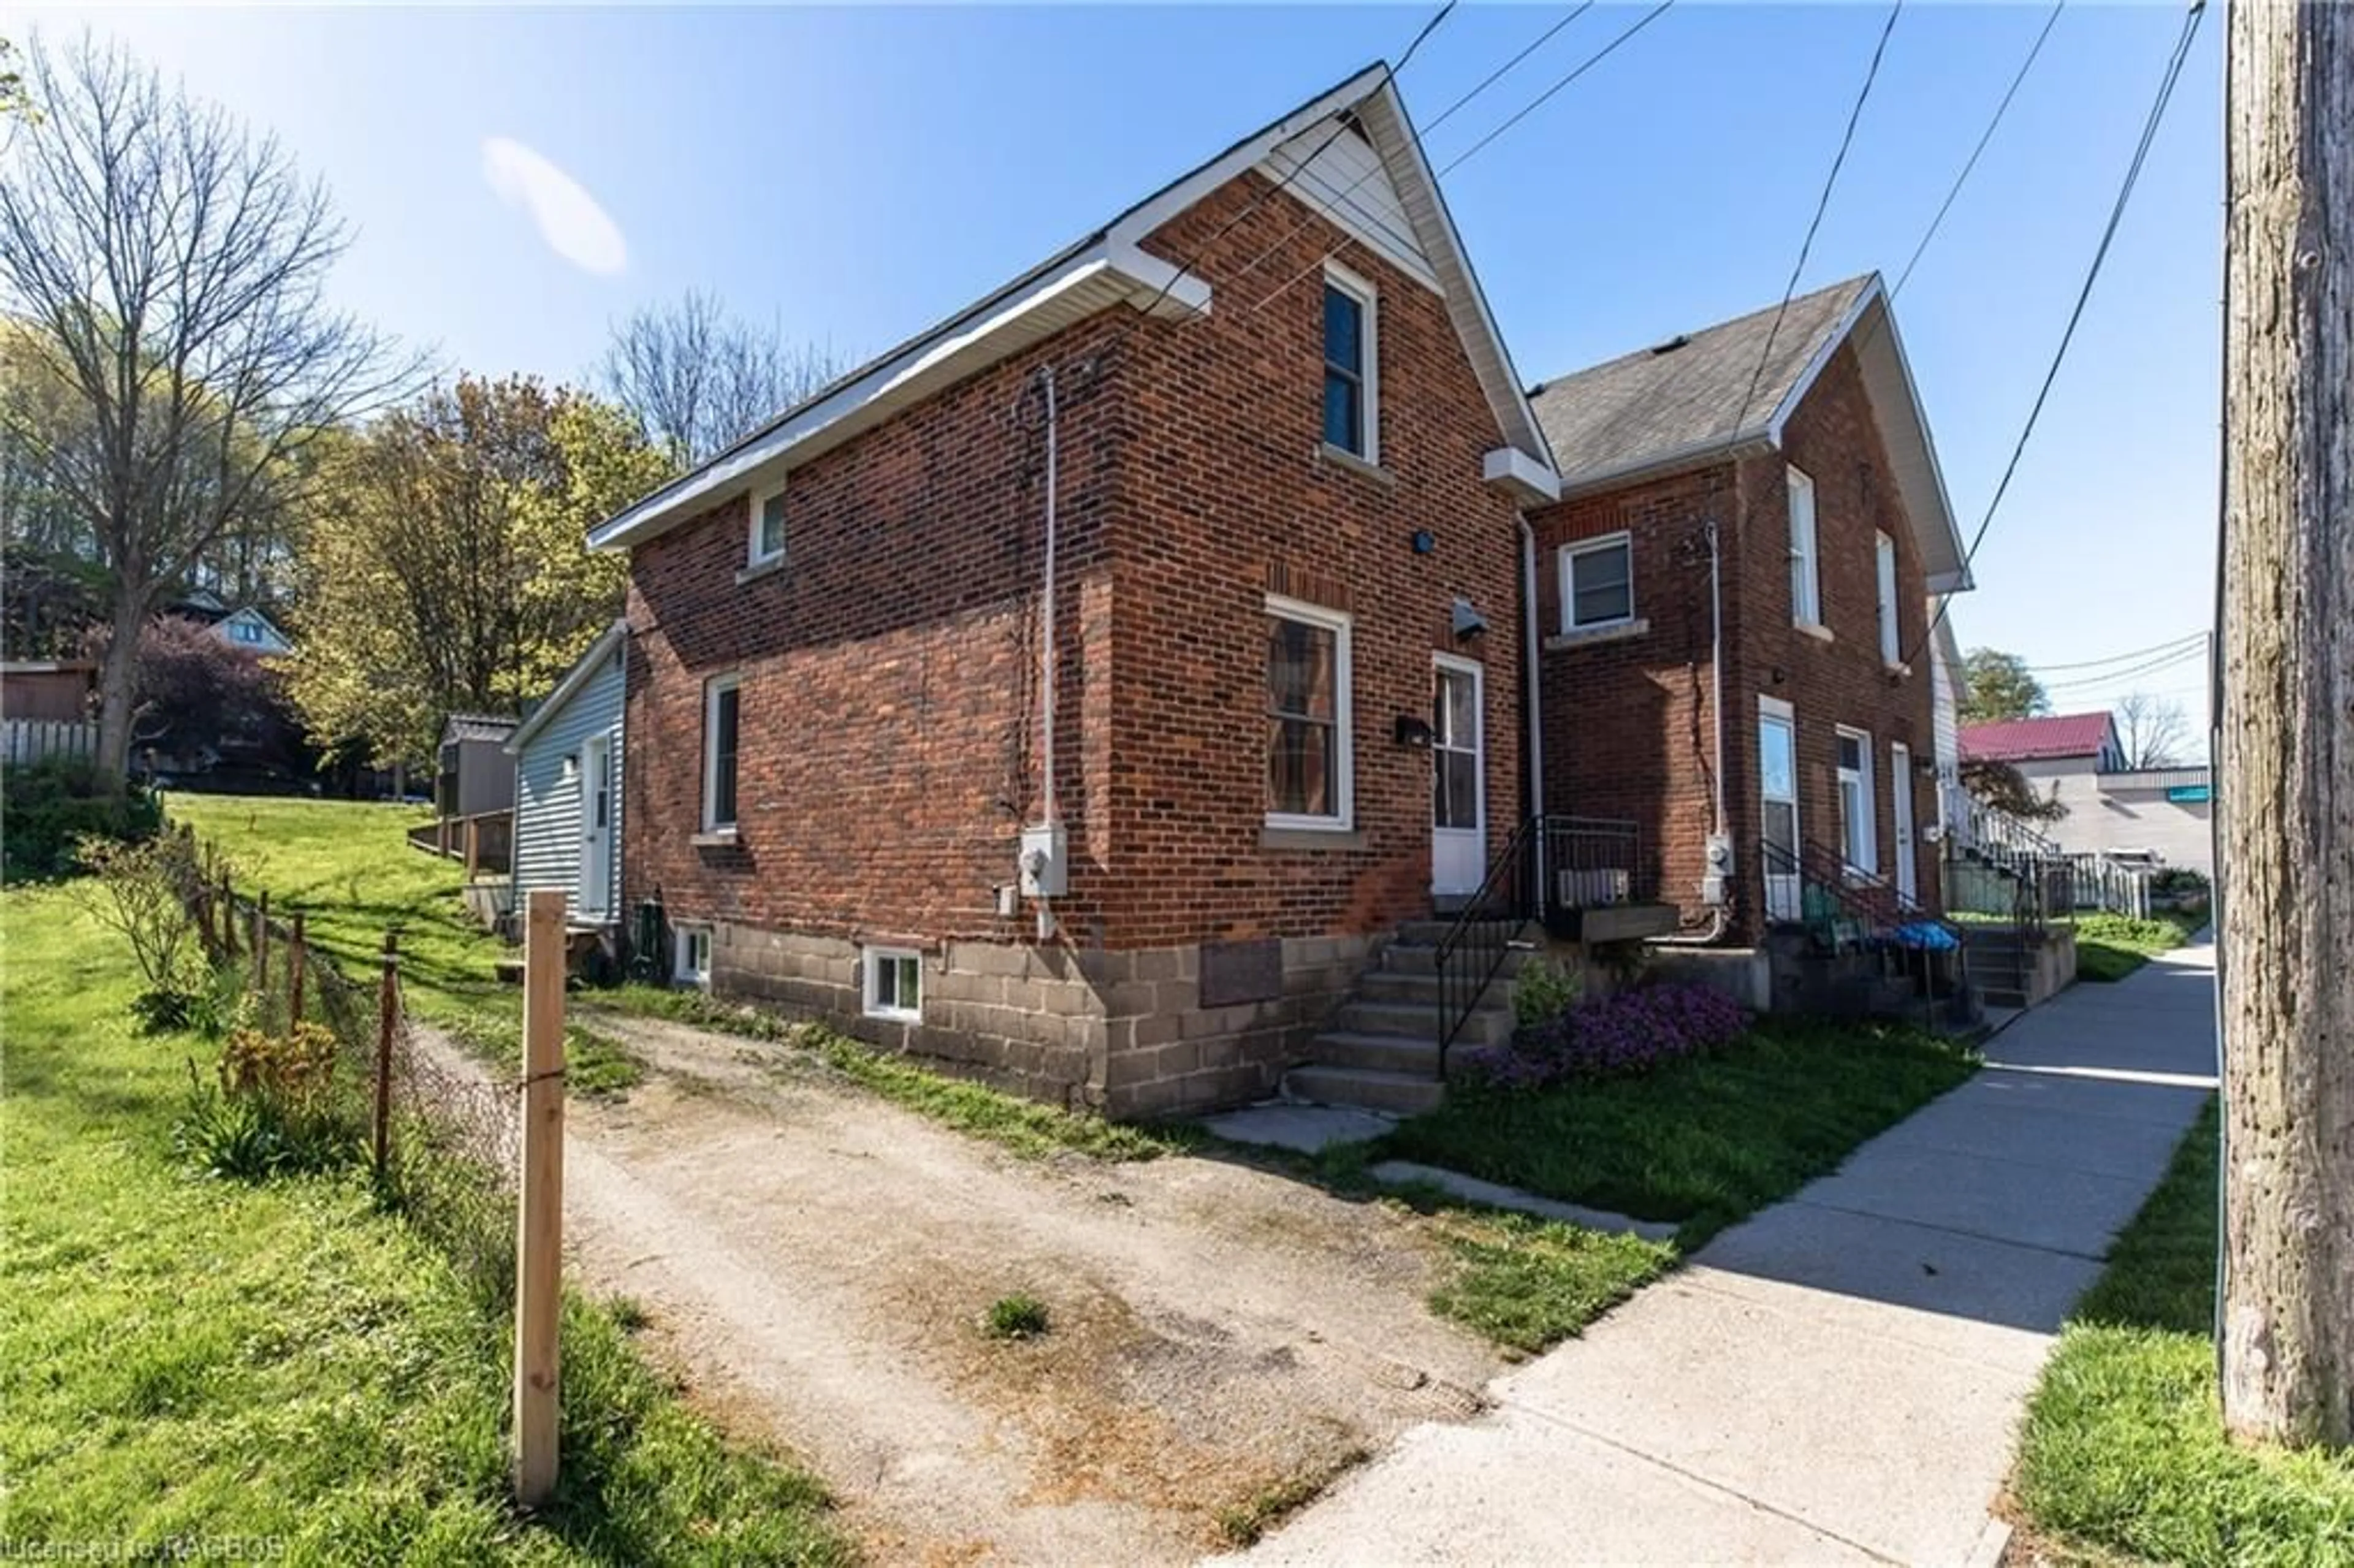 Frontside or backside of a home for 1751 3rd Ave, Owen Sound Ontario N4K 2M3